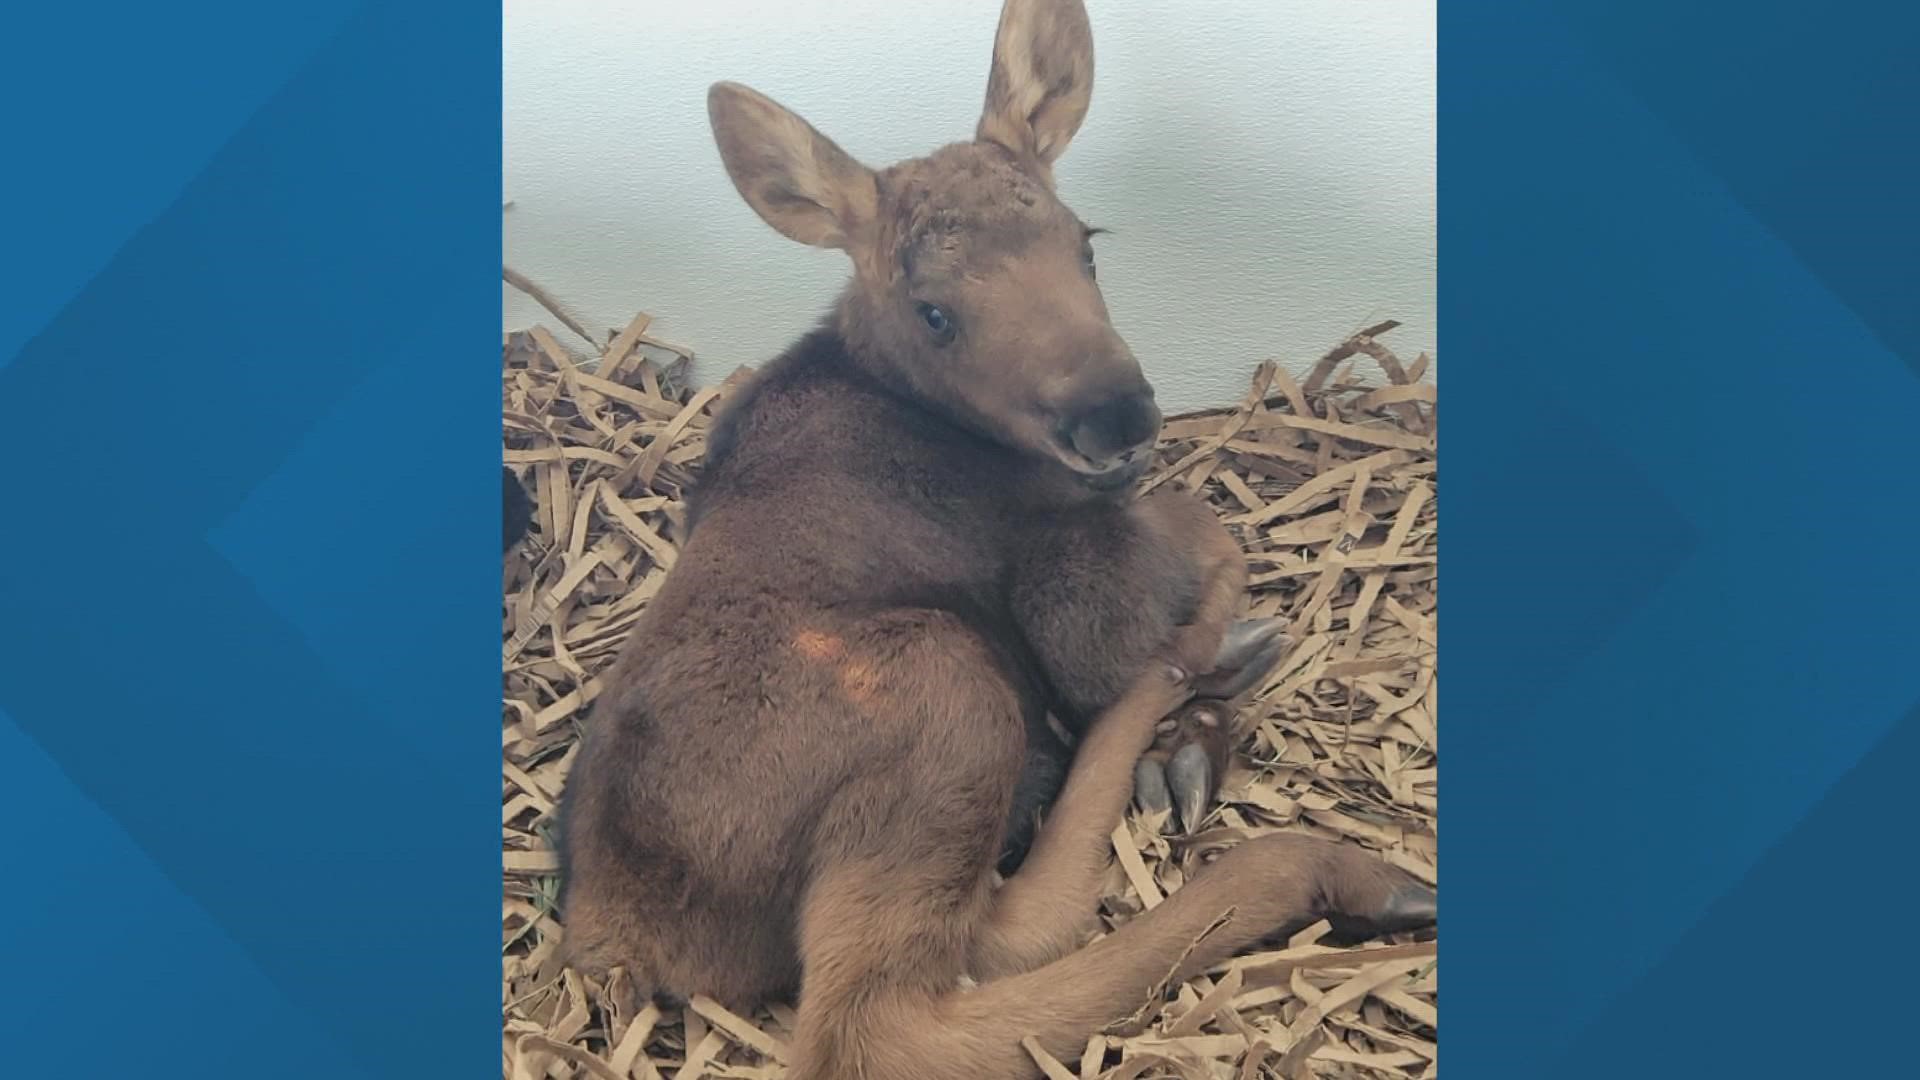 Hours after the attack, wildlife officers were able to capture the orphaned female calf near the trailhead, Colorado Parks and Wildlife (CPW) said on Thursday.